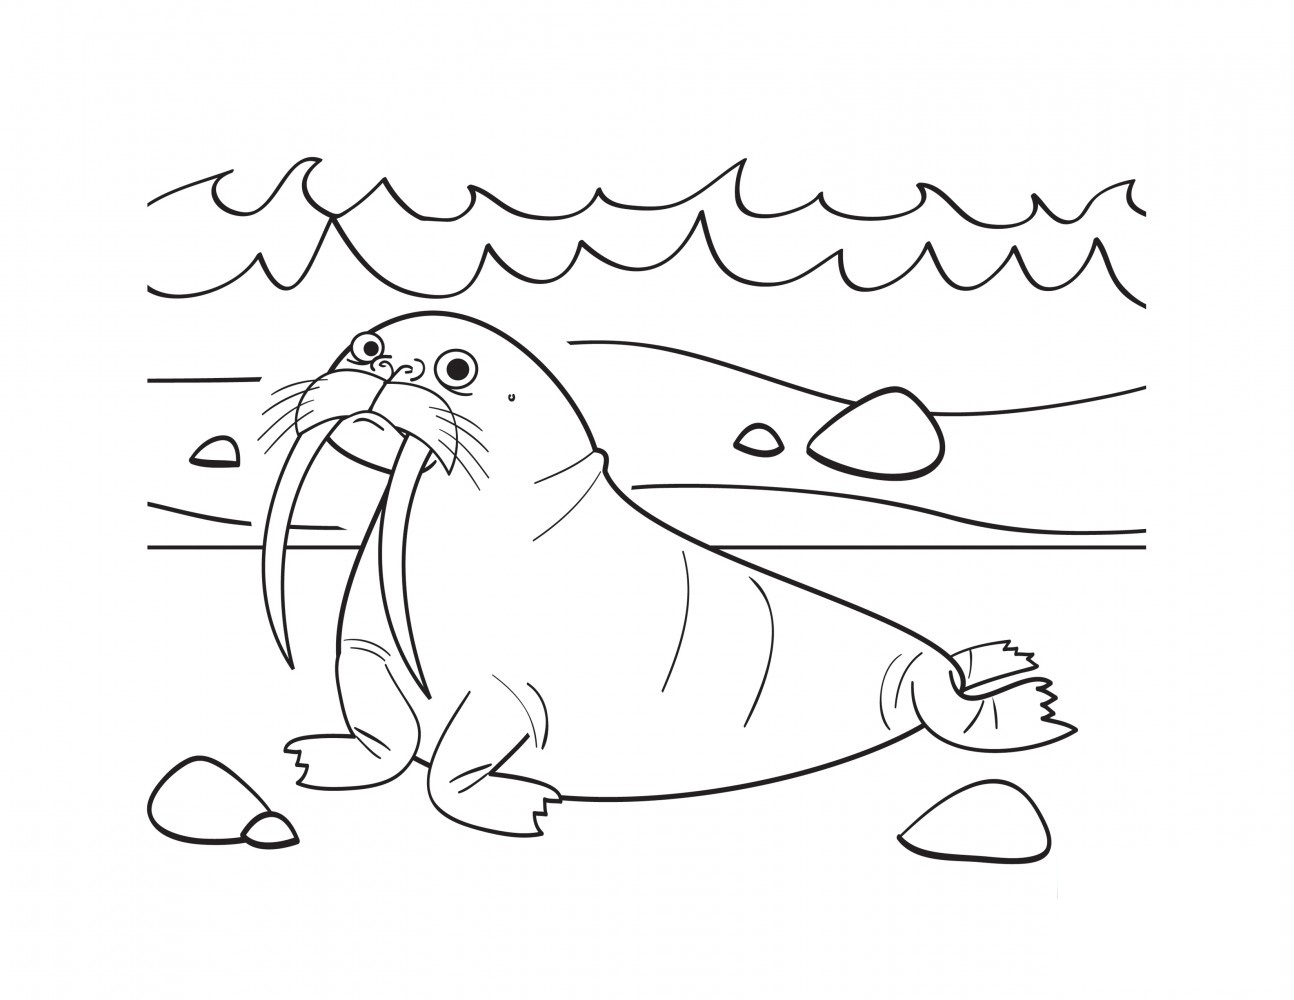 Walrus Coloring Pages Printable - Get Coloring Pages